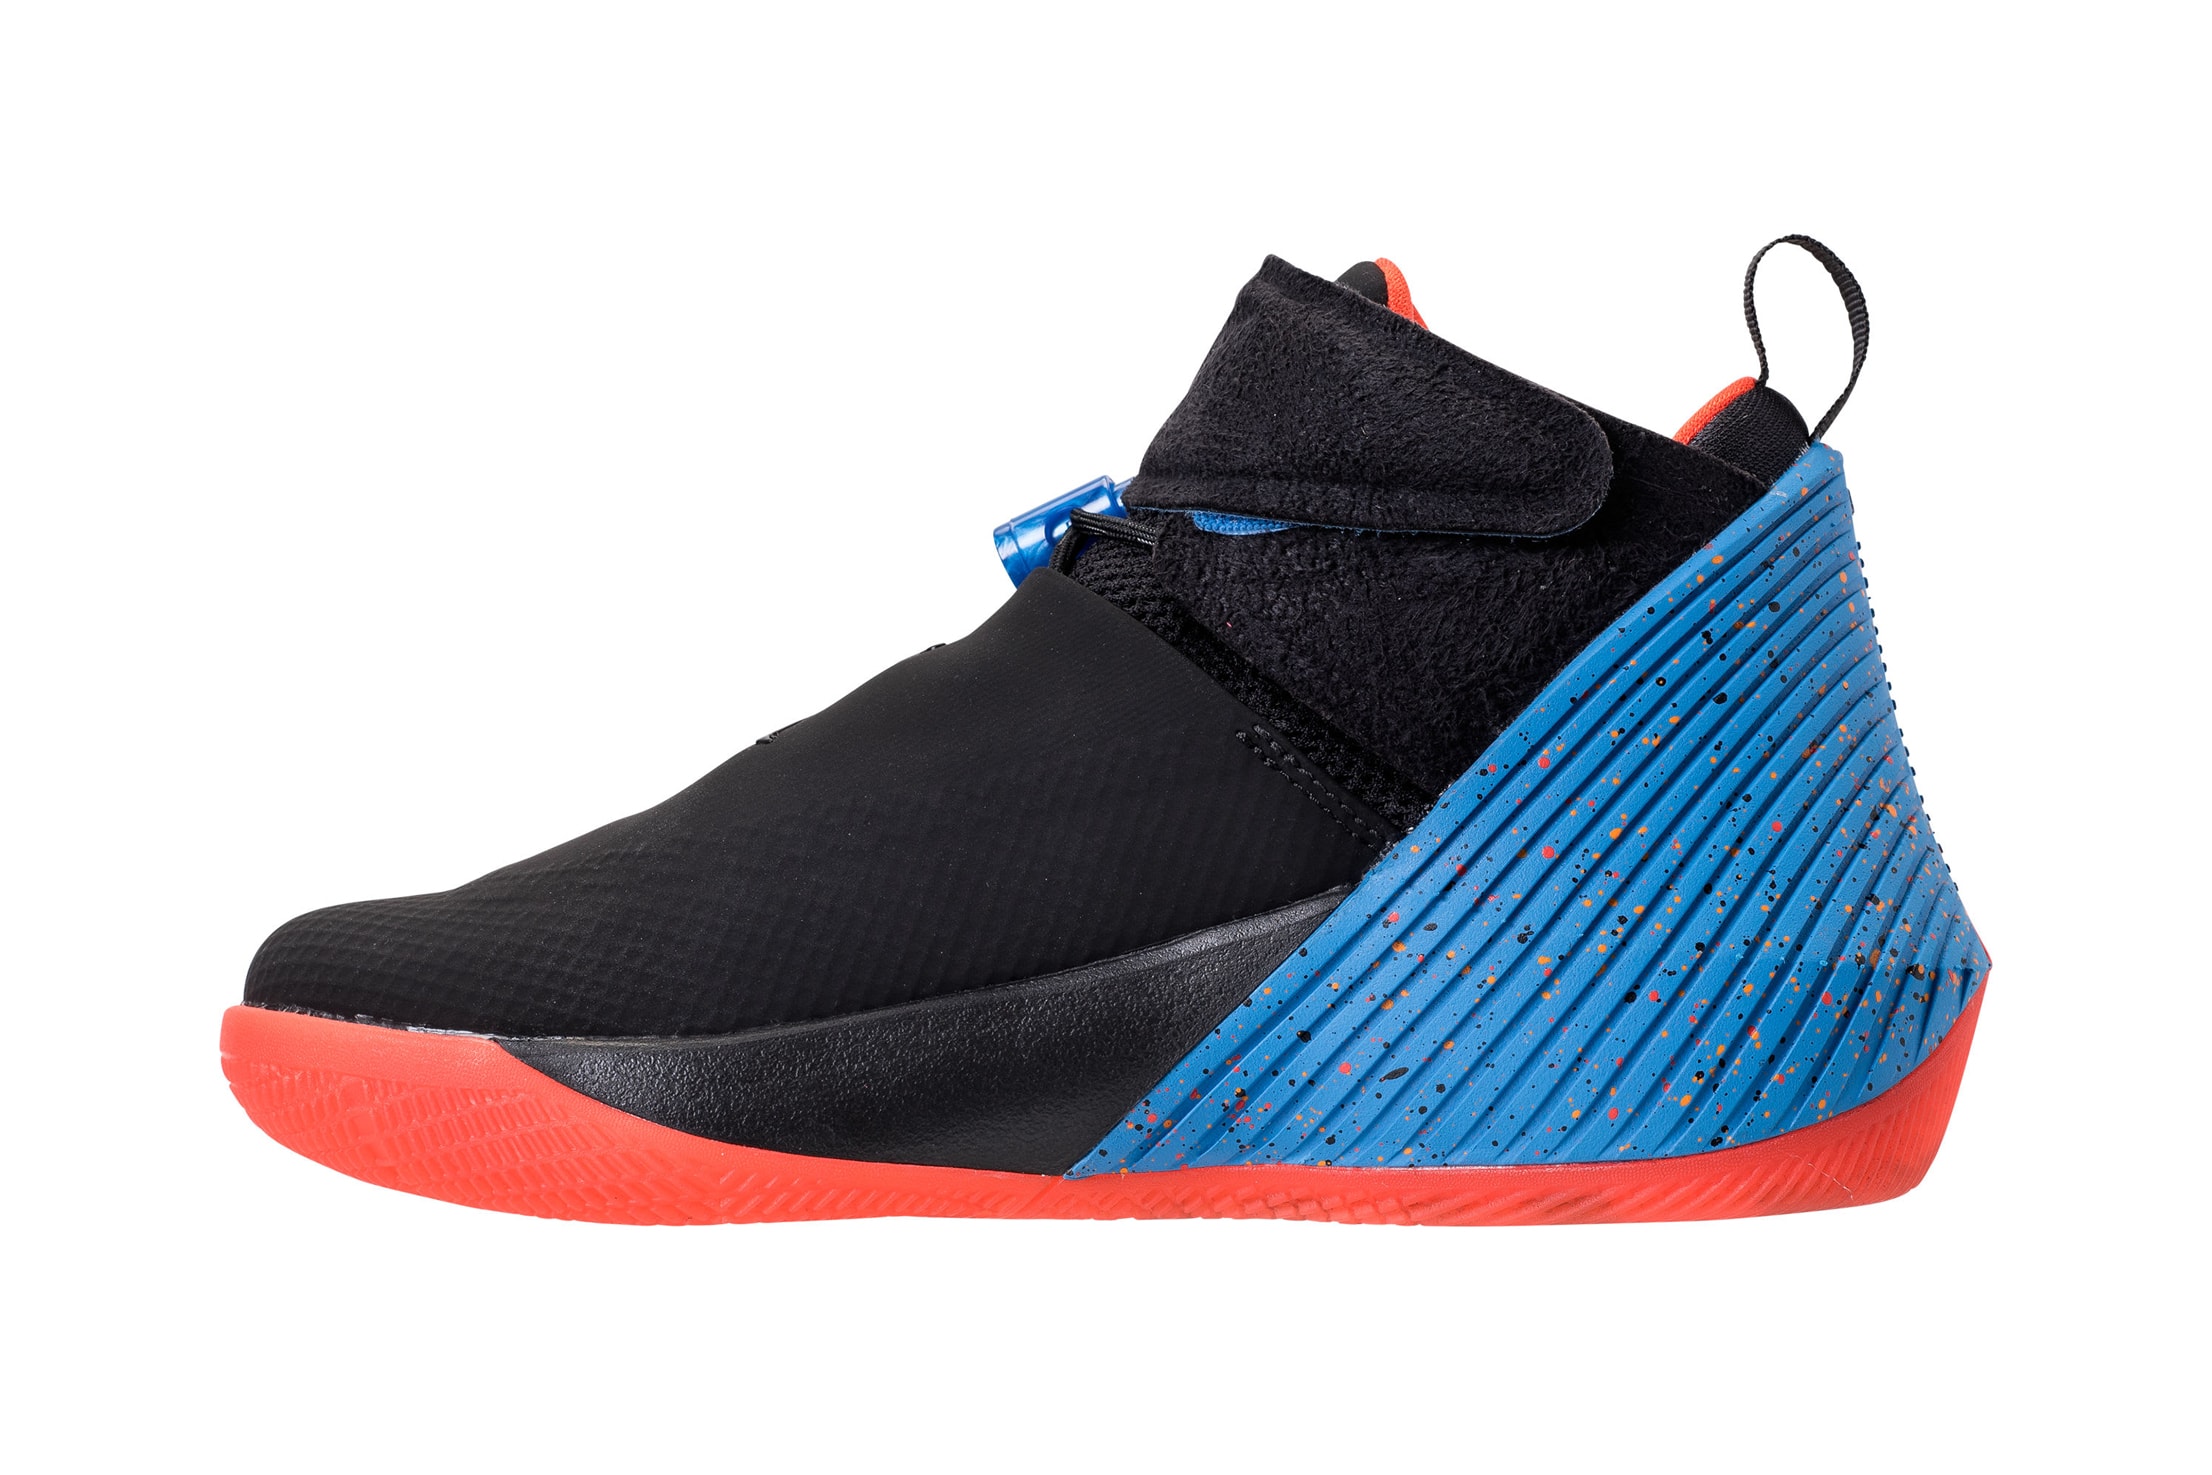 Jordan Brand Why Not Zer0.1 Release Russell Westbrook Basketball red black blue Triple Double King